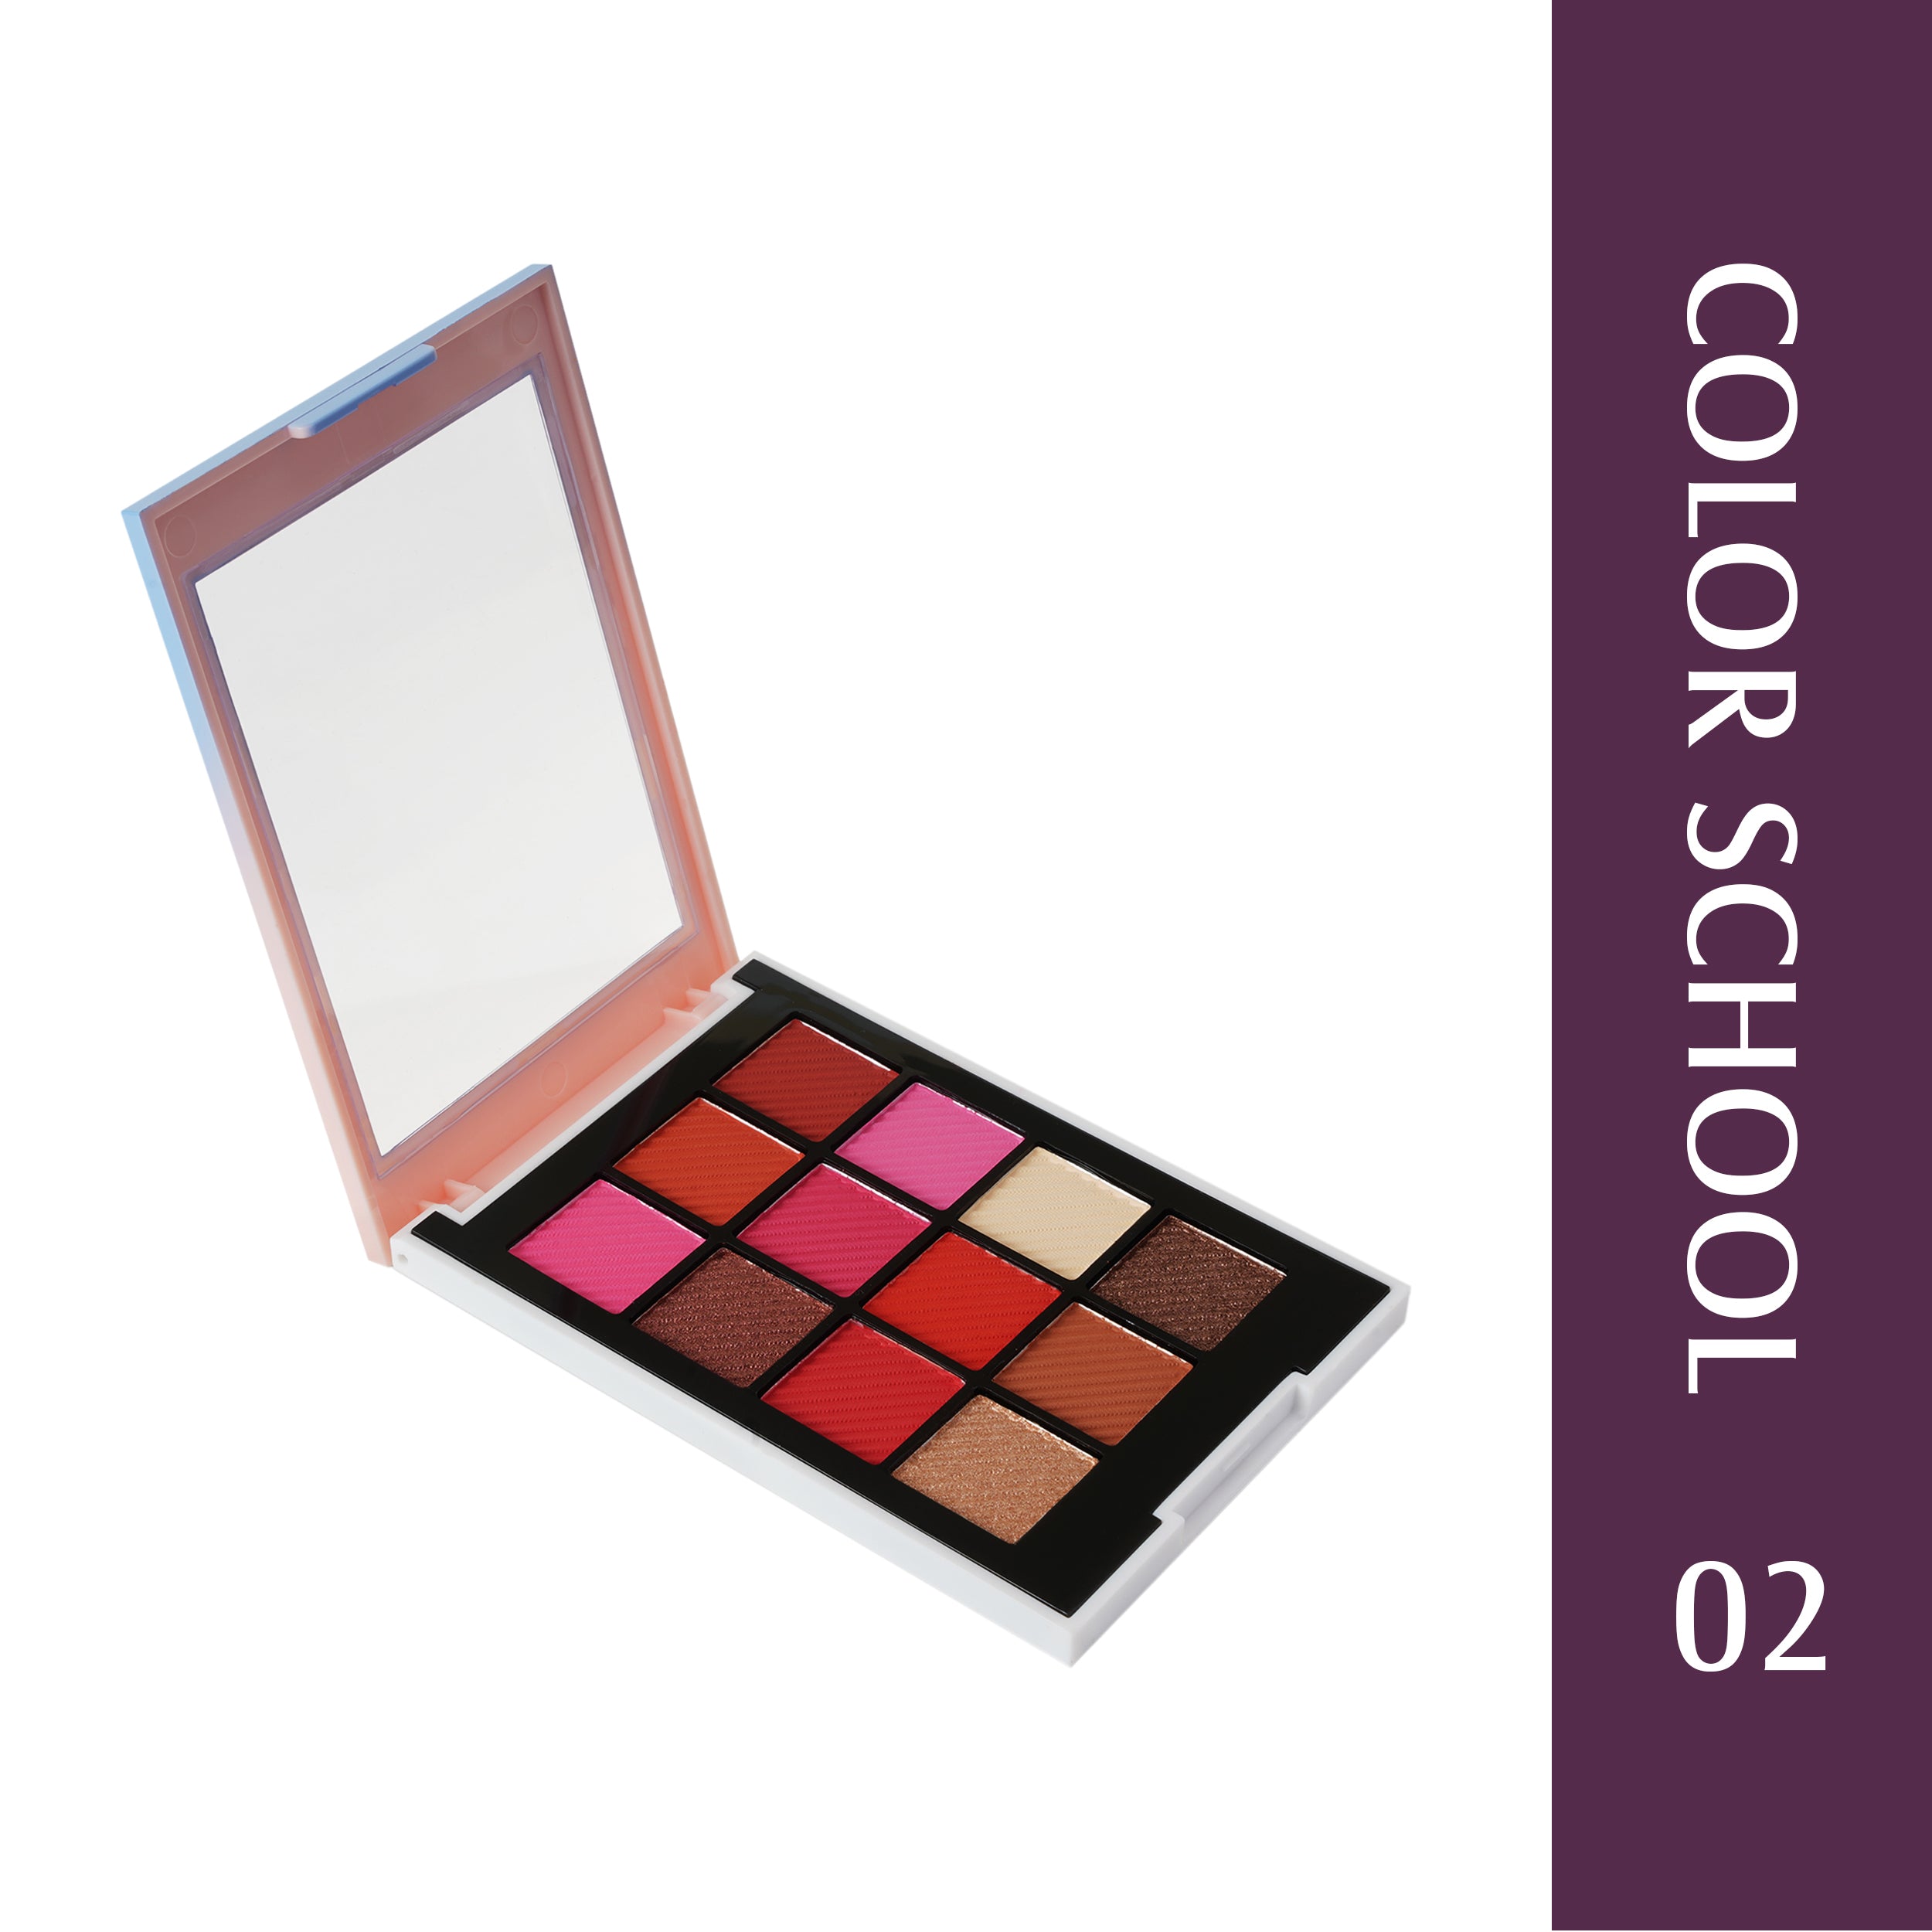 Glam21 Color School Eyeshadow Palette 12 Versatile Colors Long-Staying|Sparkles & Matte 10 g (Shade-02)